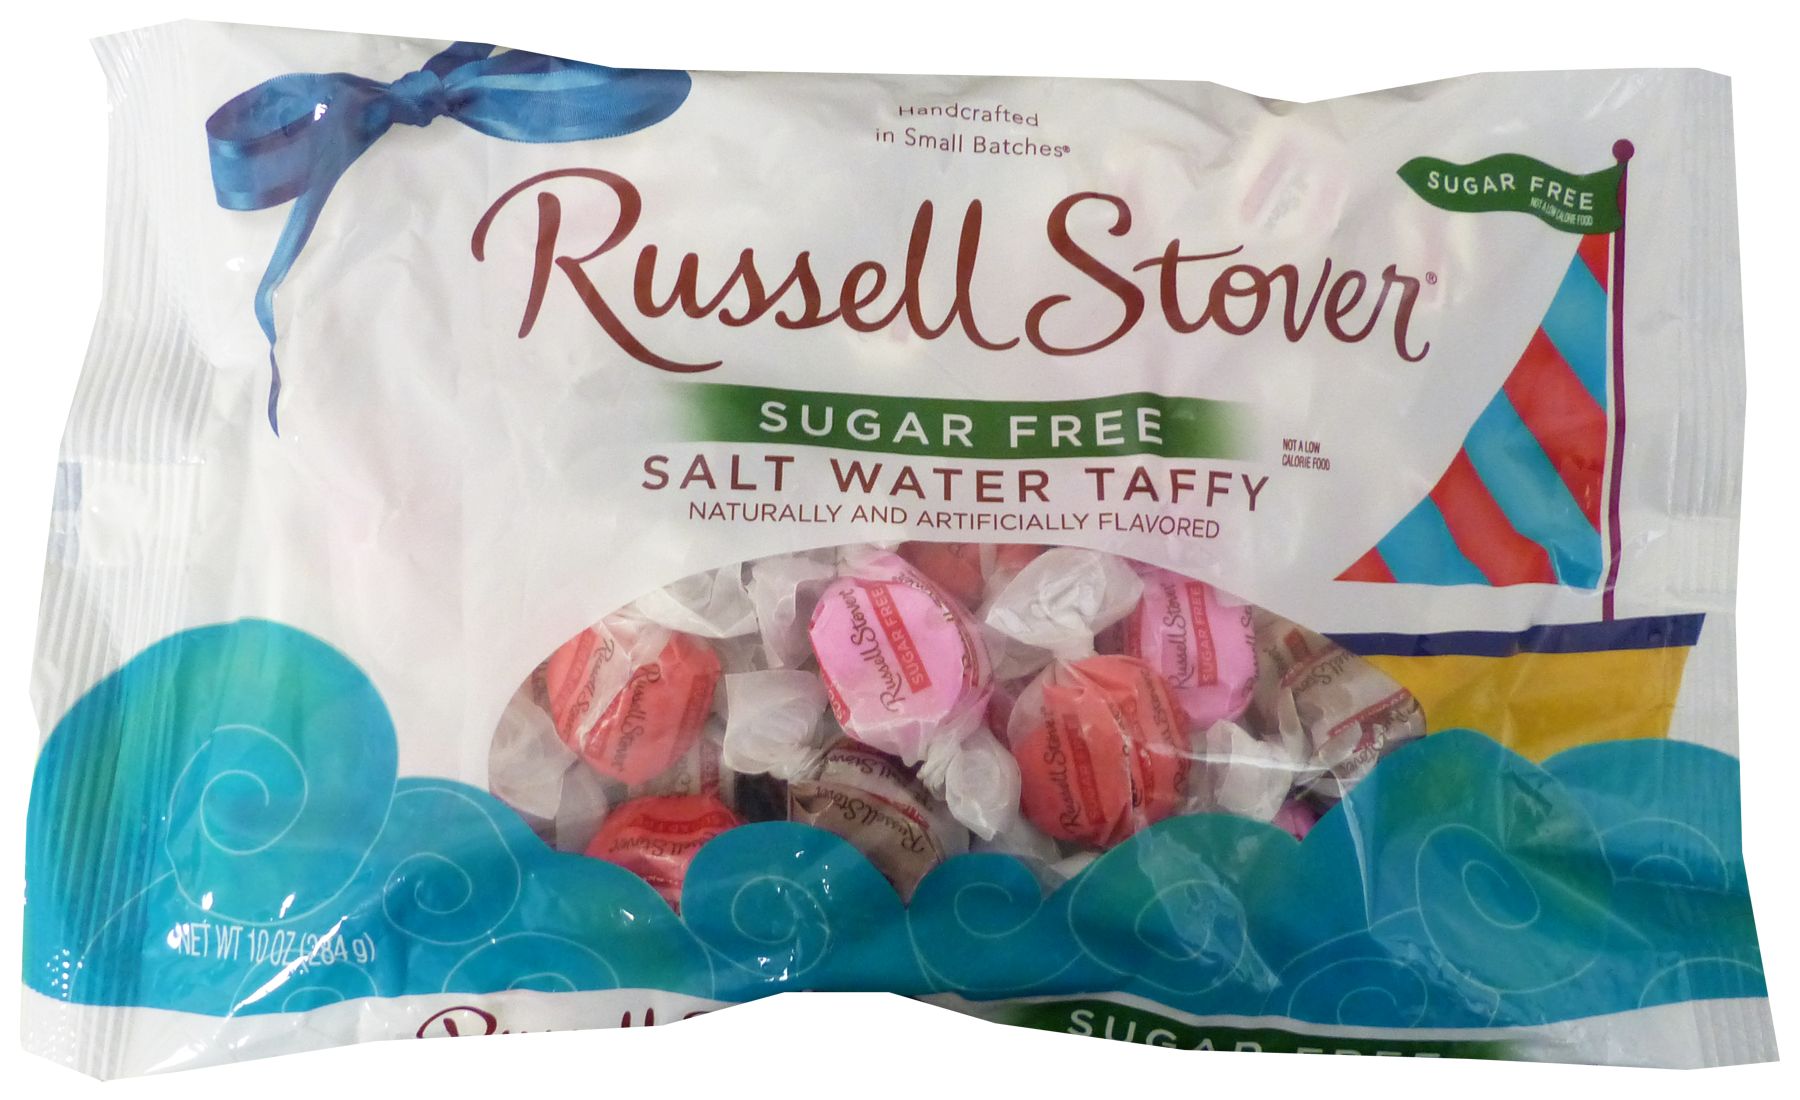 Russell Stover Sugar Free Salt Water Taffy 10 oz. by Russell Stover - Exclusive  Offer at $9.99 on Netrition